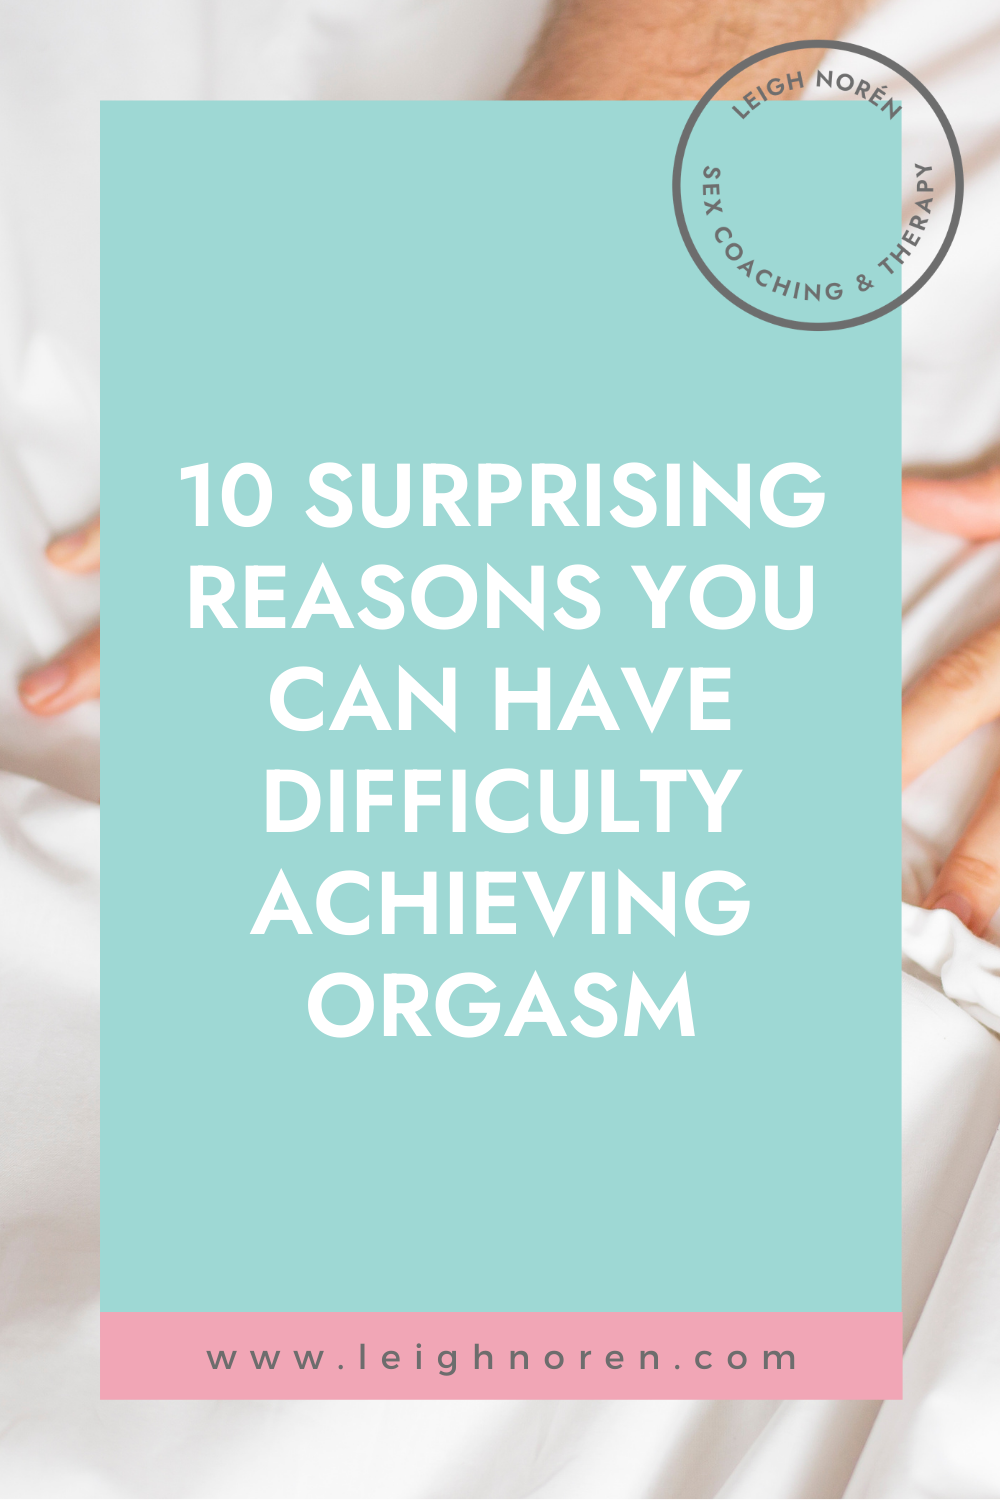 About The Simple Technique To Make You Orgasm Without Even Being ...